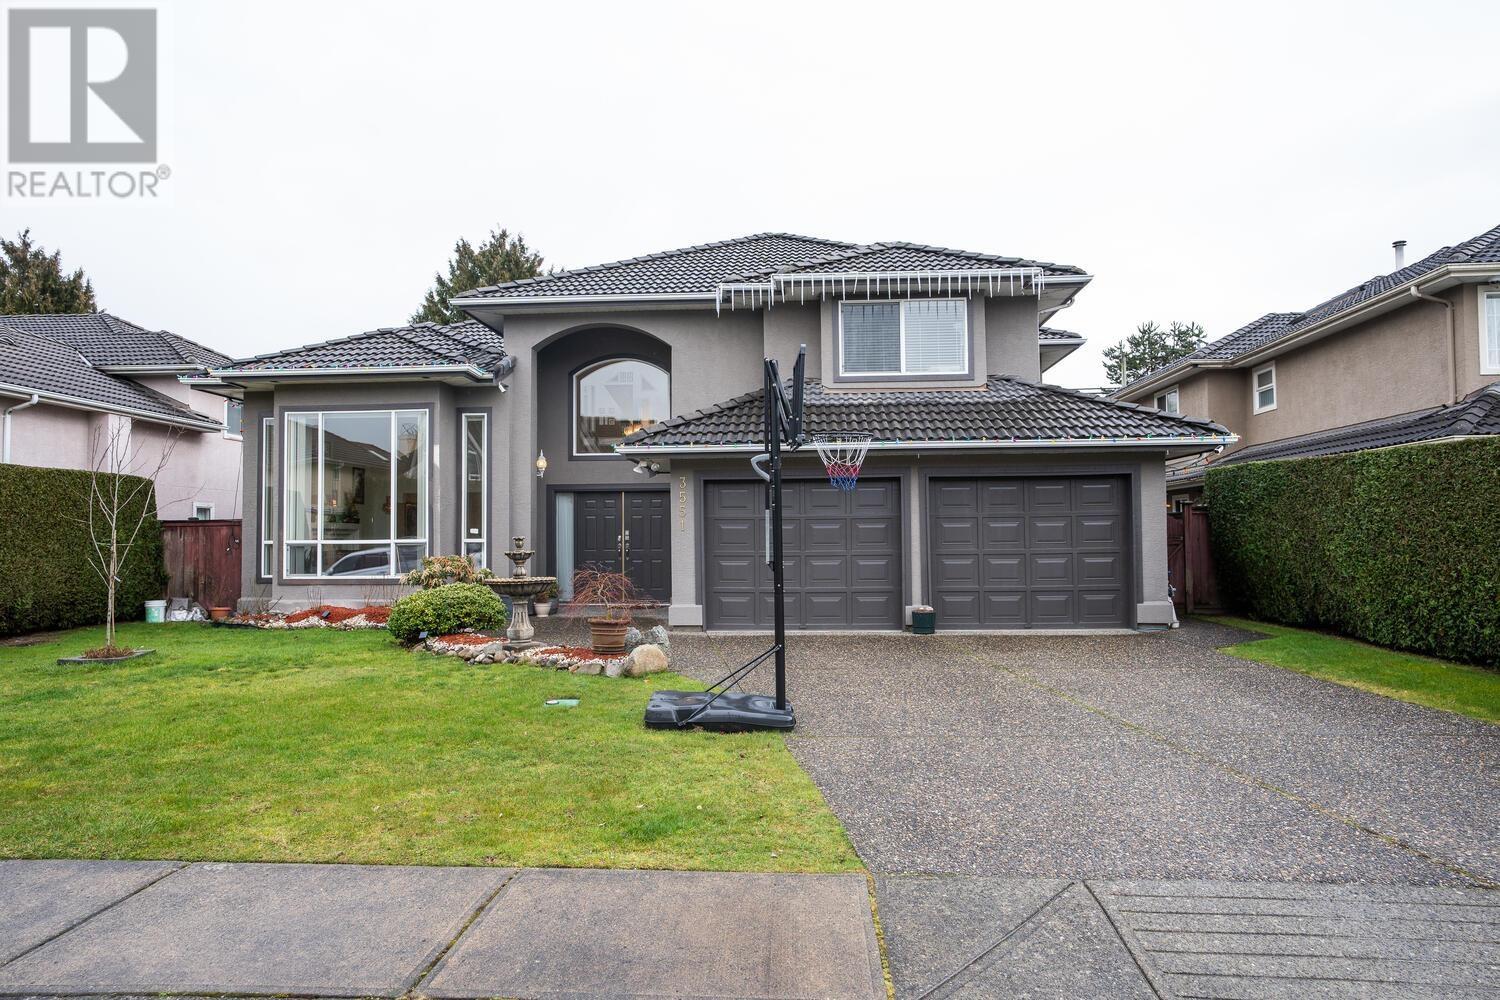 3551 SCRATCHLEY CRES